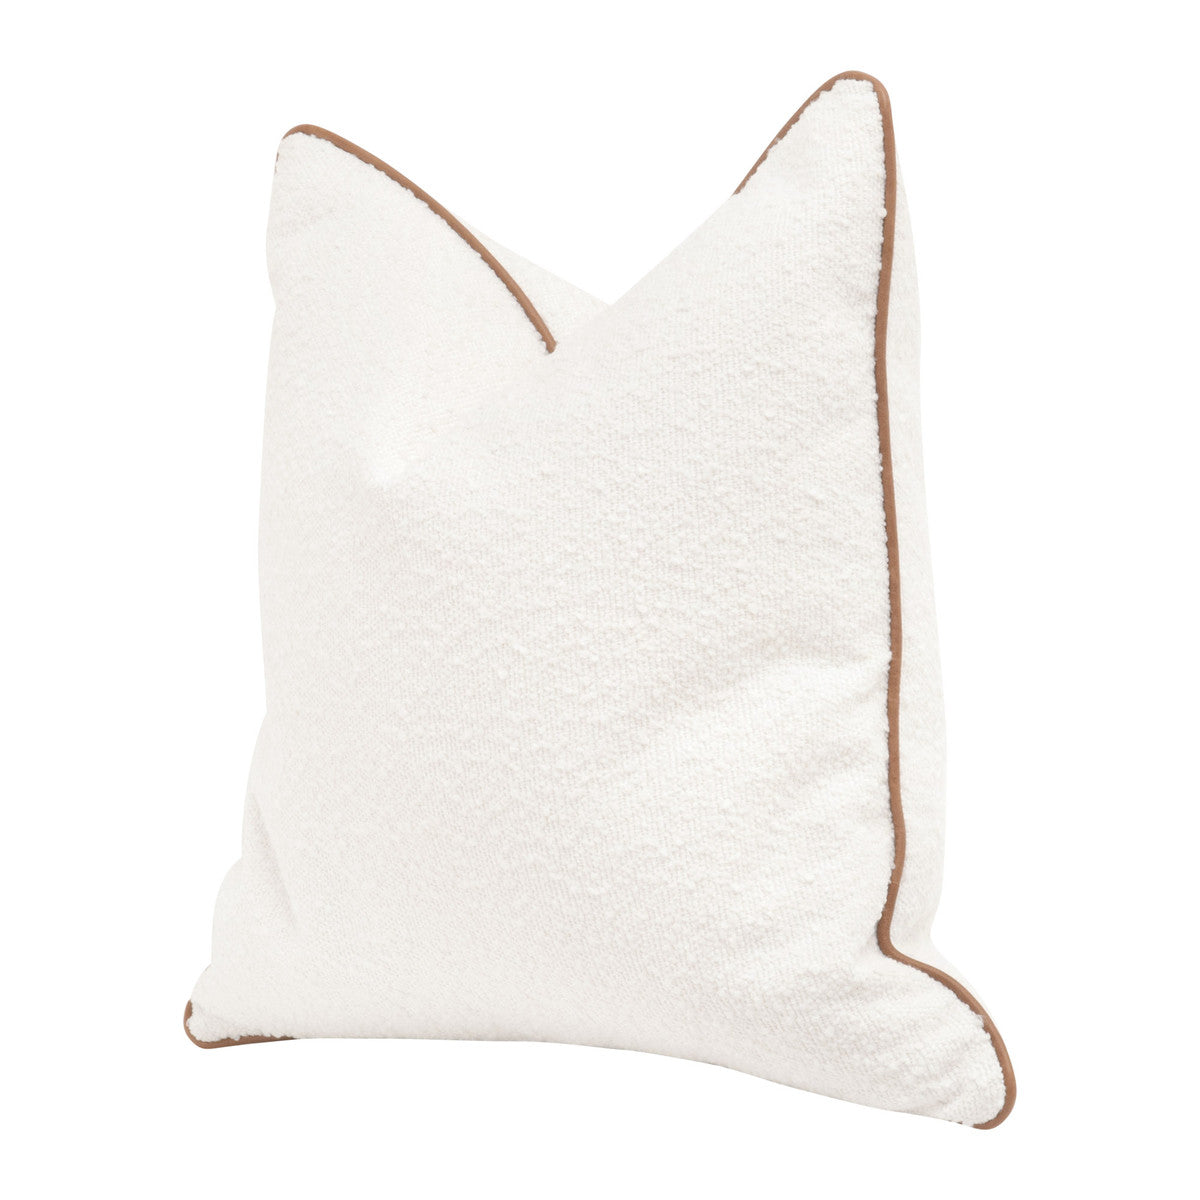 The Not So Basic 22" Essential Pillow in Livesmart Boucle-Snow, Whiskey Brown Top Grain Leather Piping, Set of 2 - 7202-22.BOU-SNO/WB